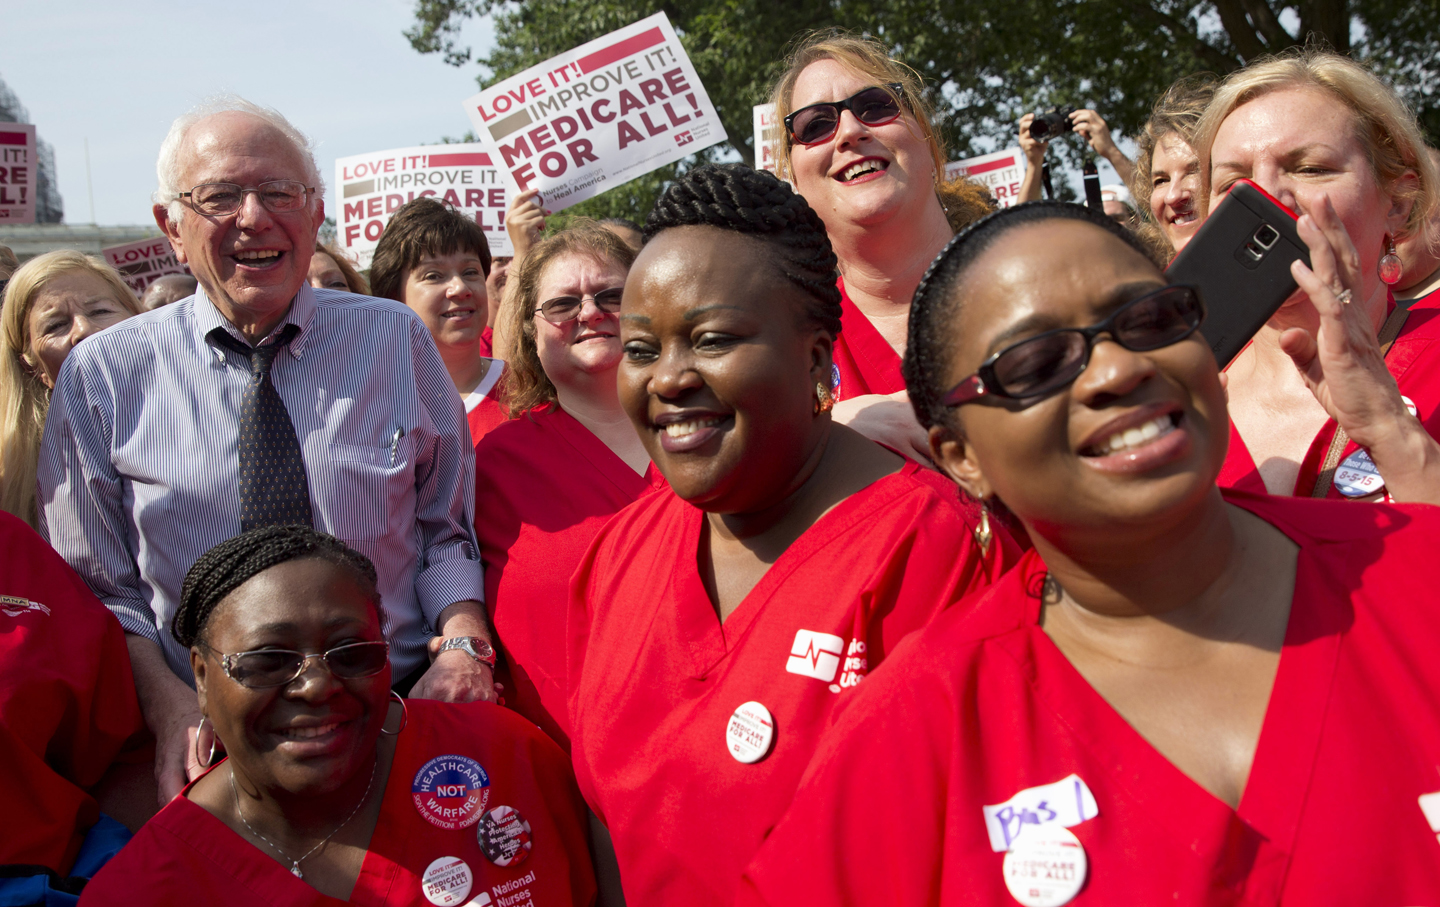 Democratic presidential candidate, Sen. Bernie Sanders, I-Vt., left, poses with a group of nurses after speaking at a rally on the 50th anniversary of Medicare and Medicaid, Thursday, July 30, 2015, on Capitol Hill in Washington. (AP Photo/Jacquelyn Martin)